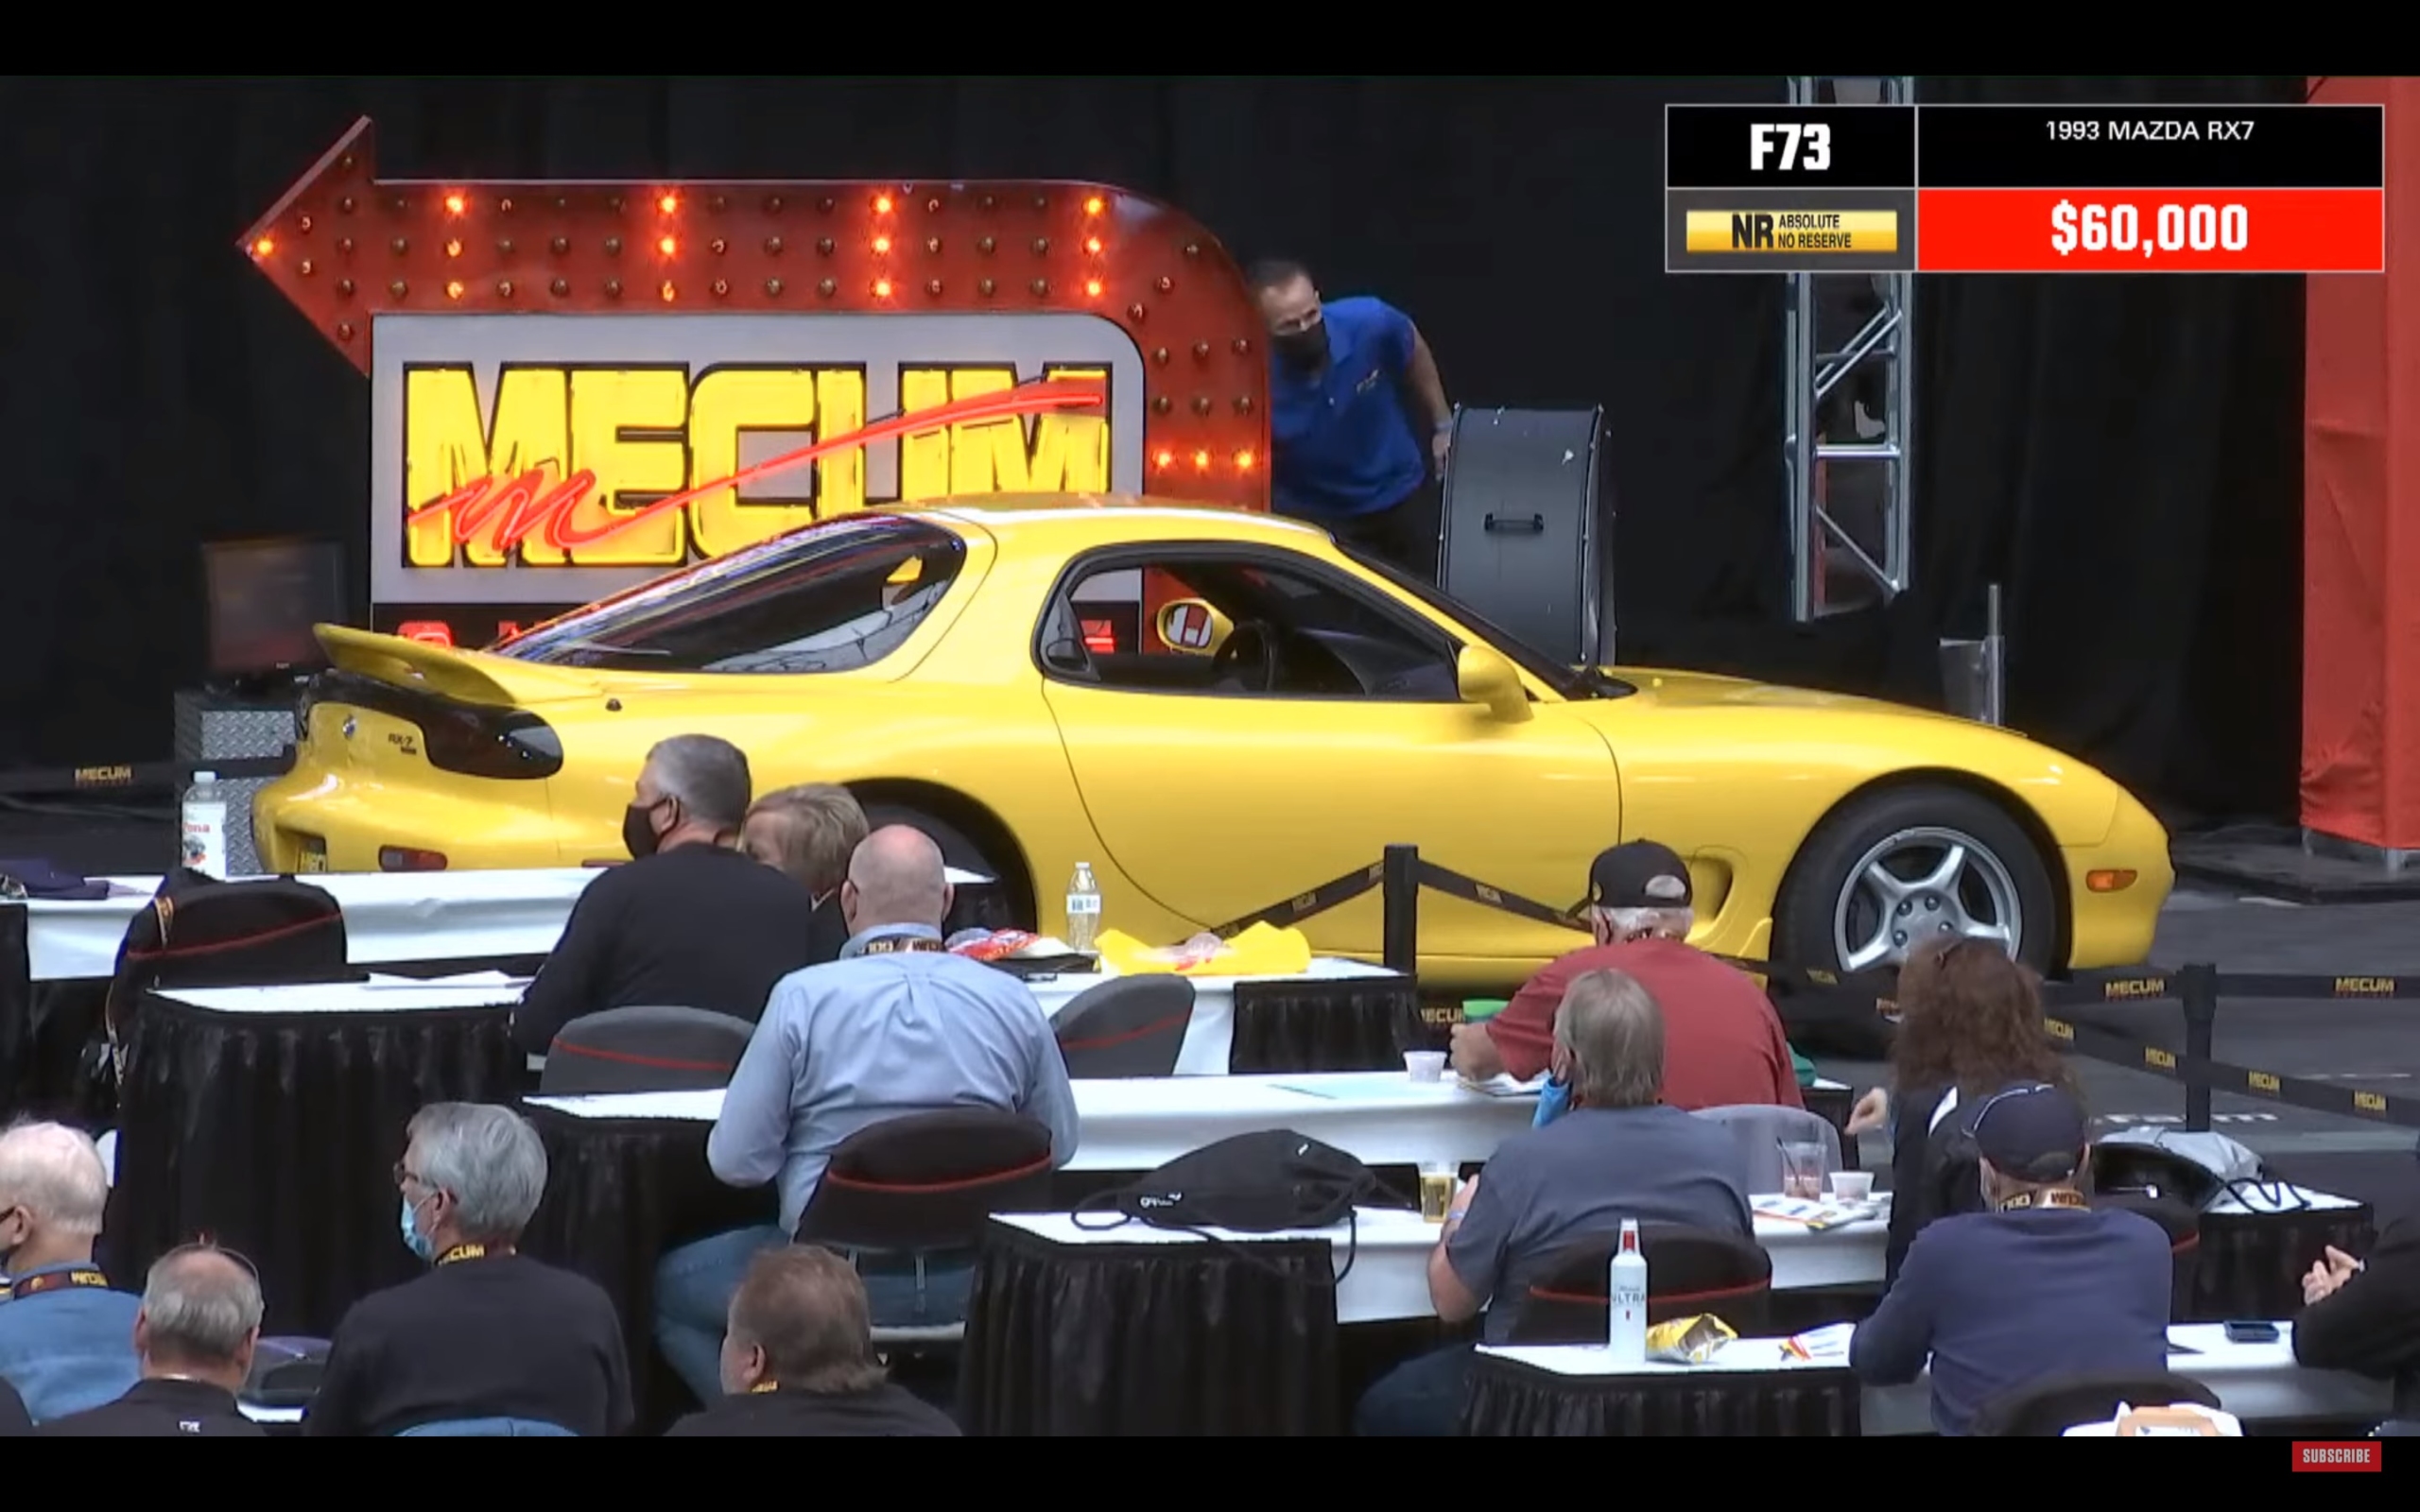 a mazda rx-7 fd has sold for $60,000 at auction | japanese